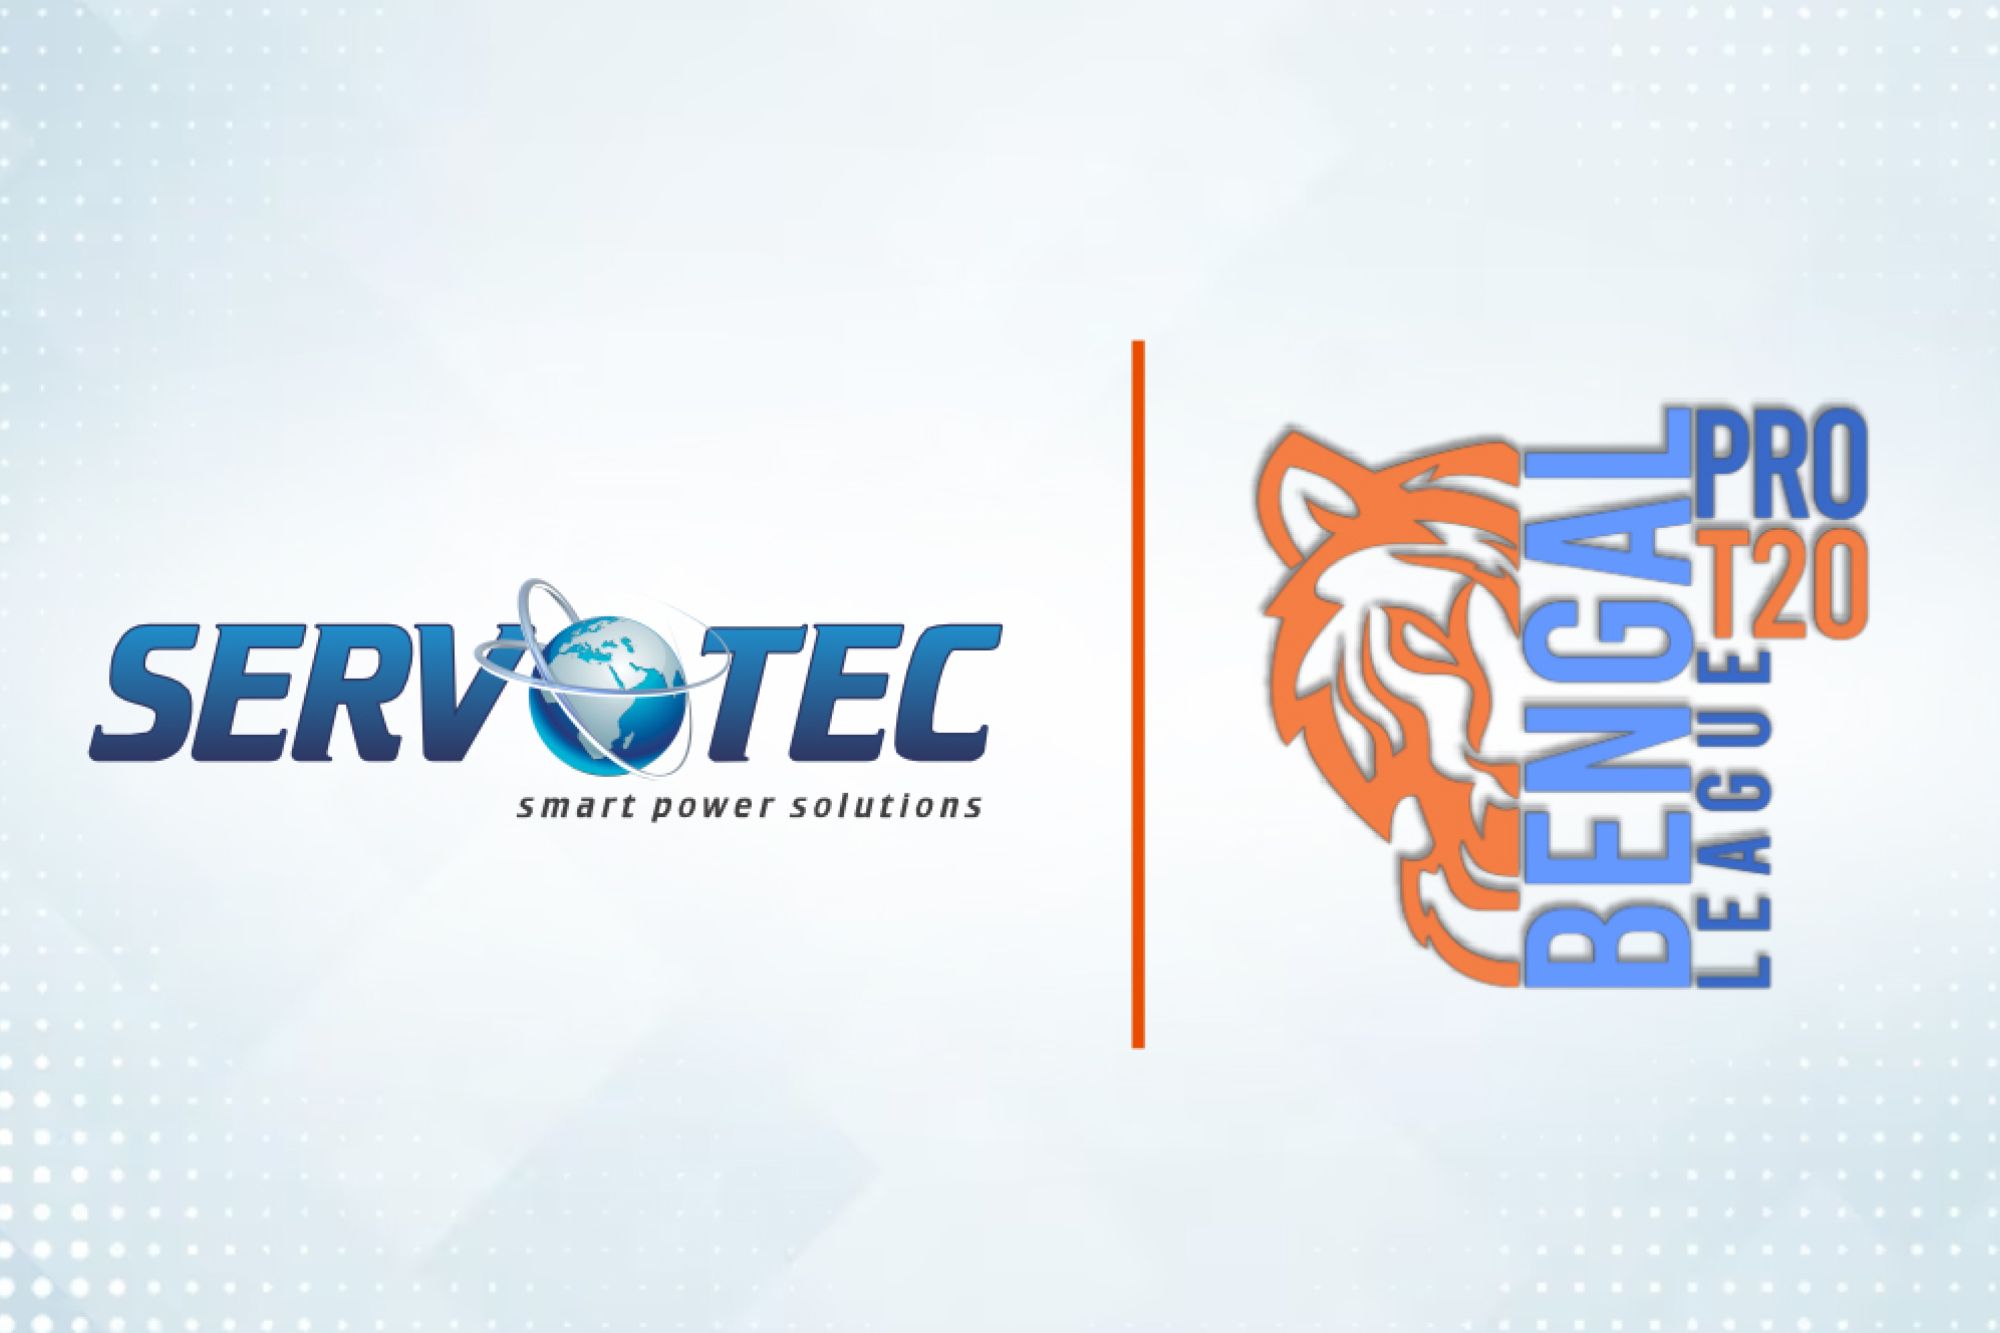 Servotech Power Systems acquires cricket team in Bengal Pro T20 League